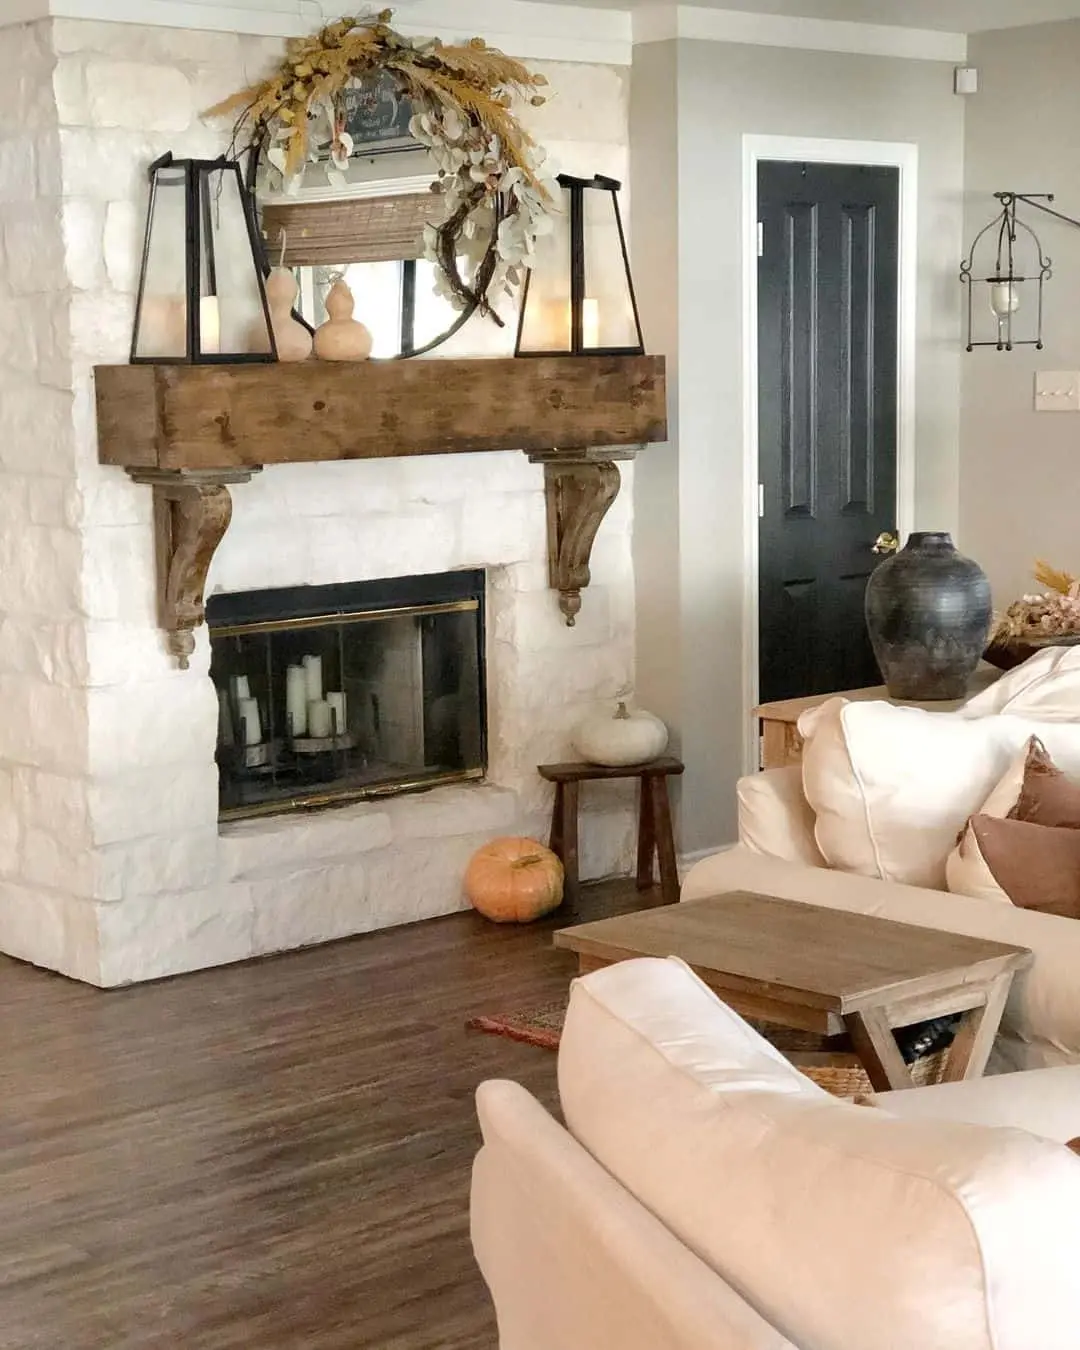 Mirror above fireplace ideas; A beautiful wreath elegantly hanging on a mirror, creating a charming focal point. The wreath's fall foliage and dull colors add a warming touch to the space. Completing the cozy ambiance, lanterns are carefully placed on the mantel, casting a warm glow and adding a hint of rustic charm.